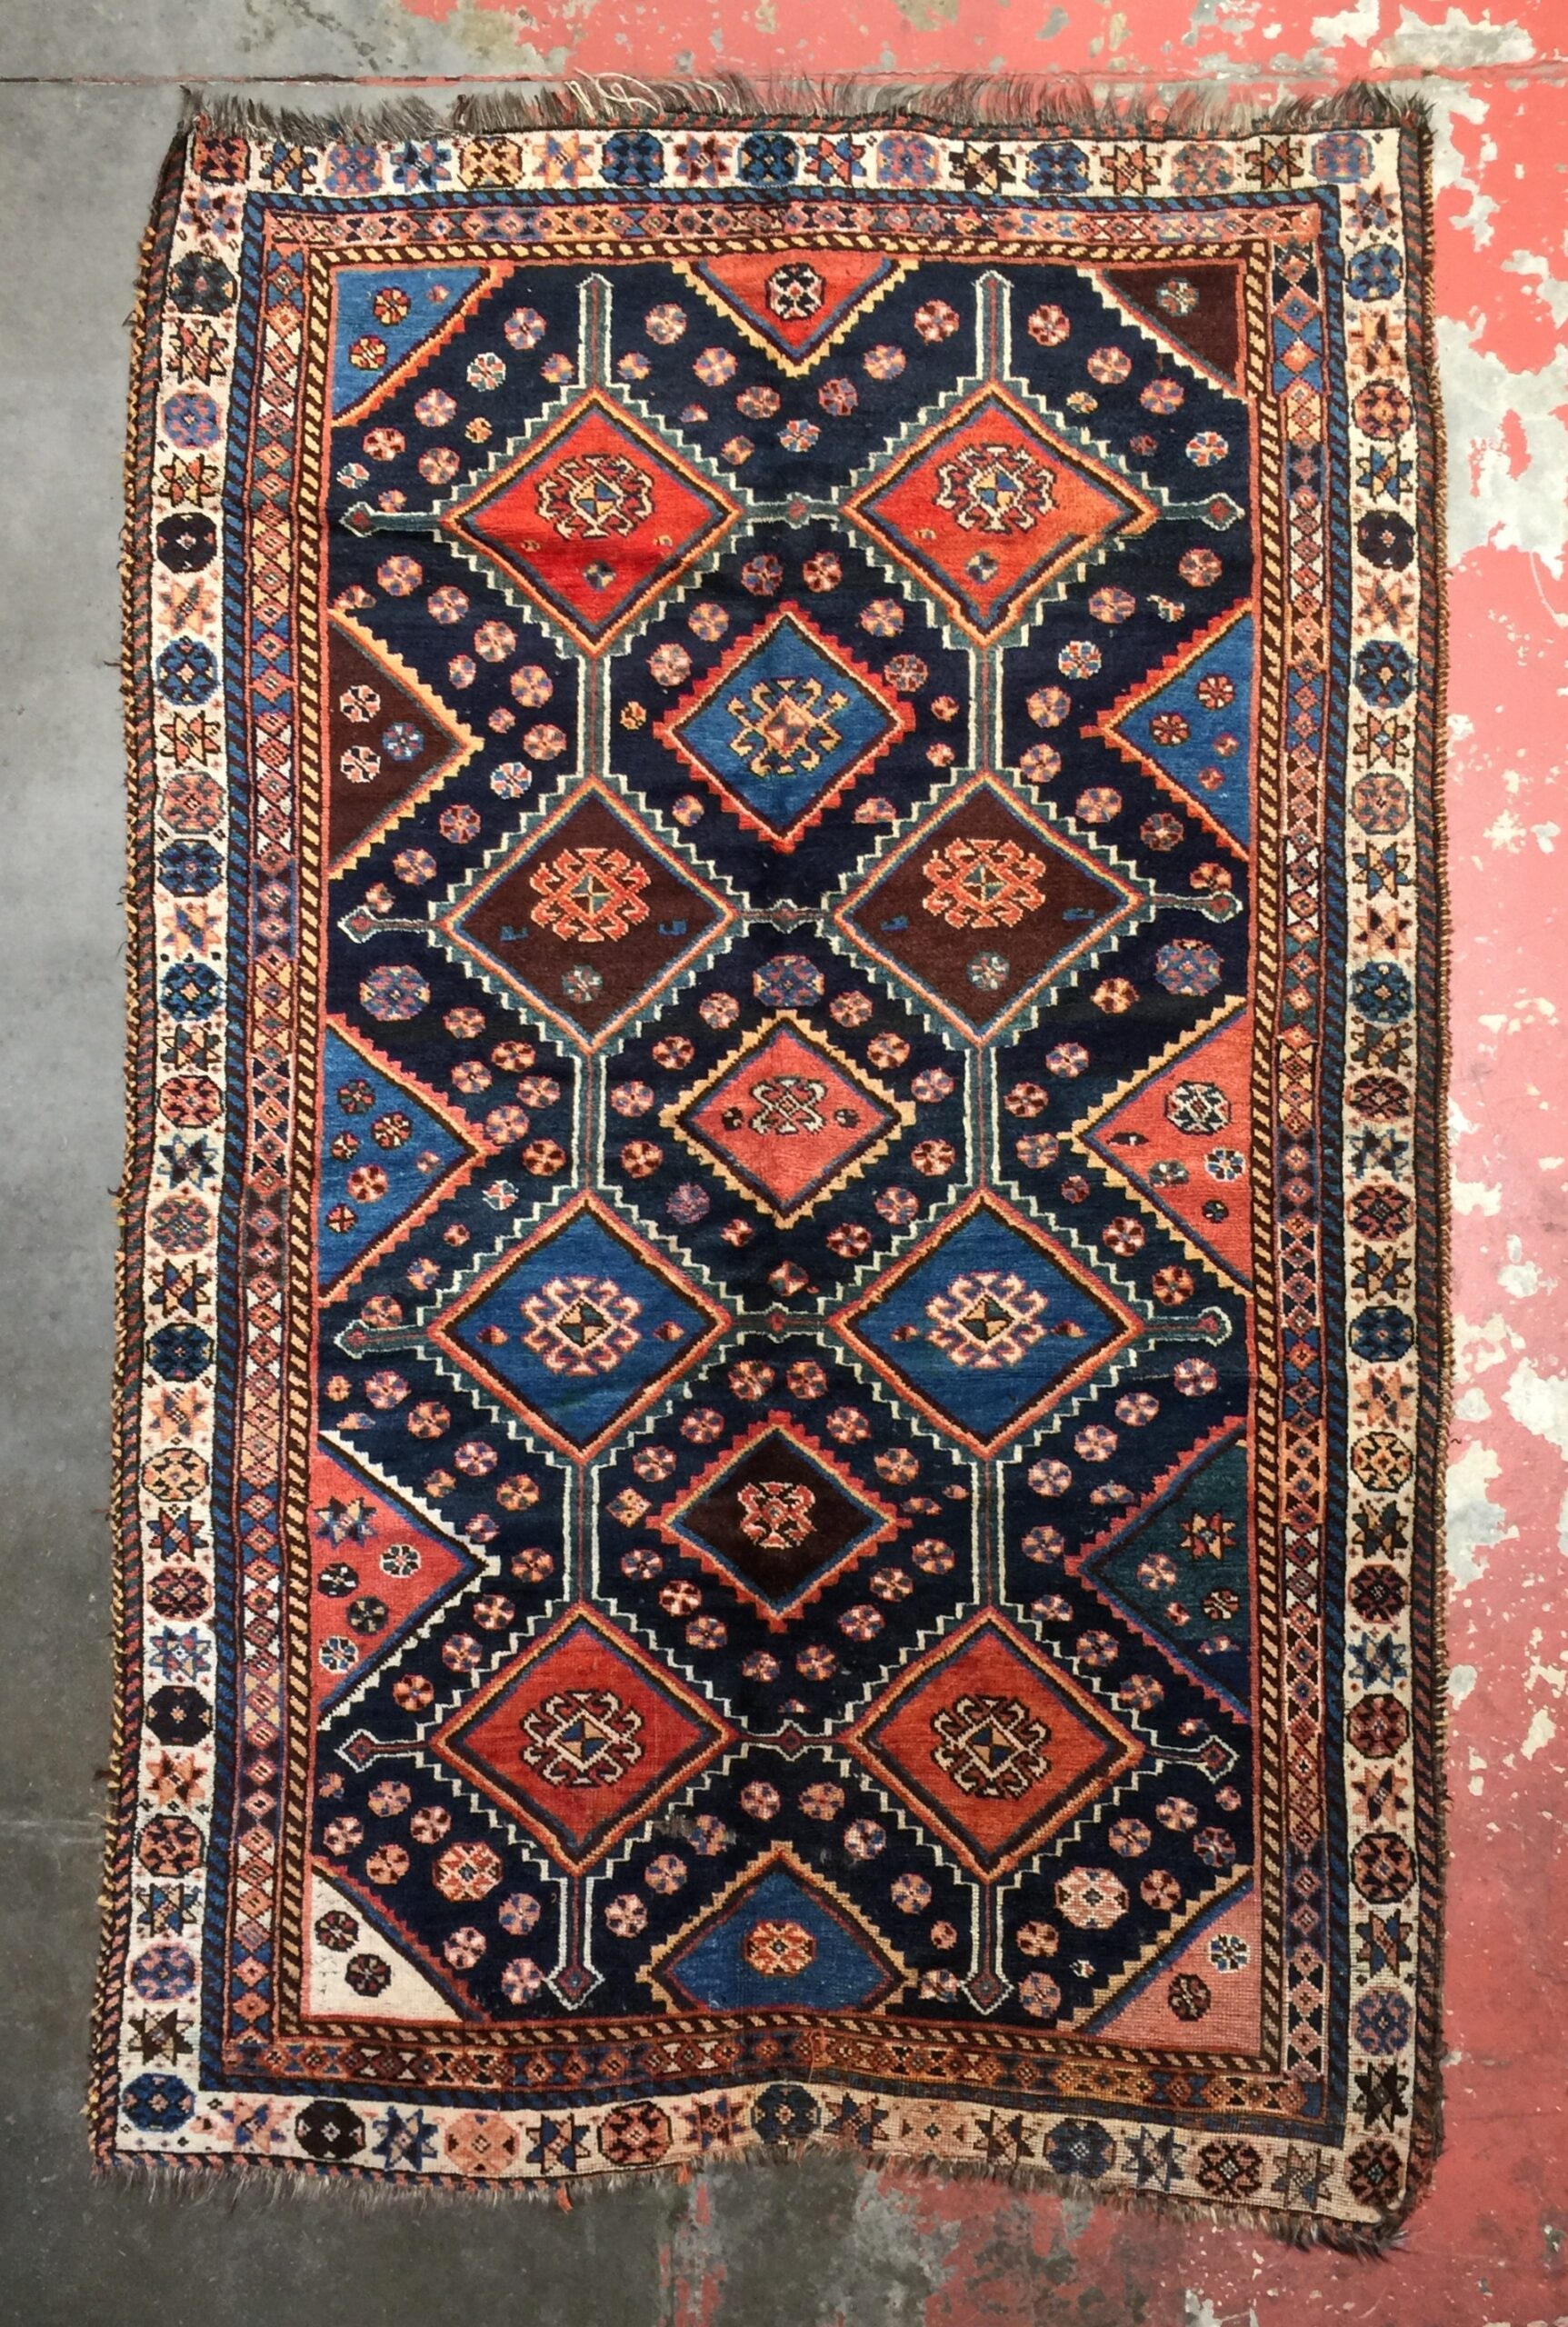 An overview of tribal rug